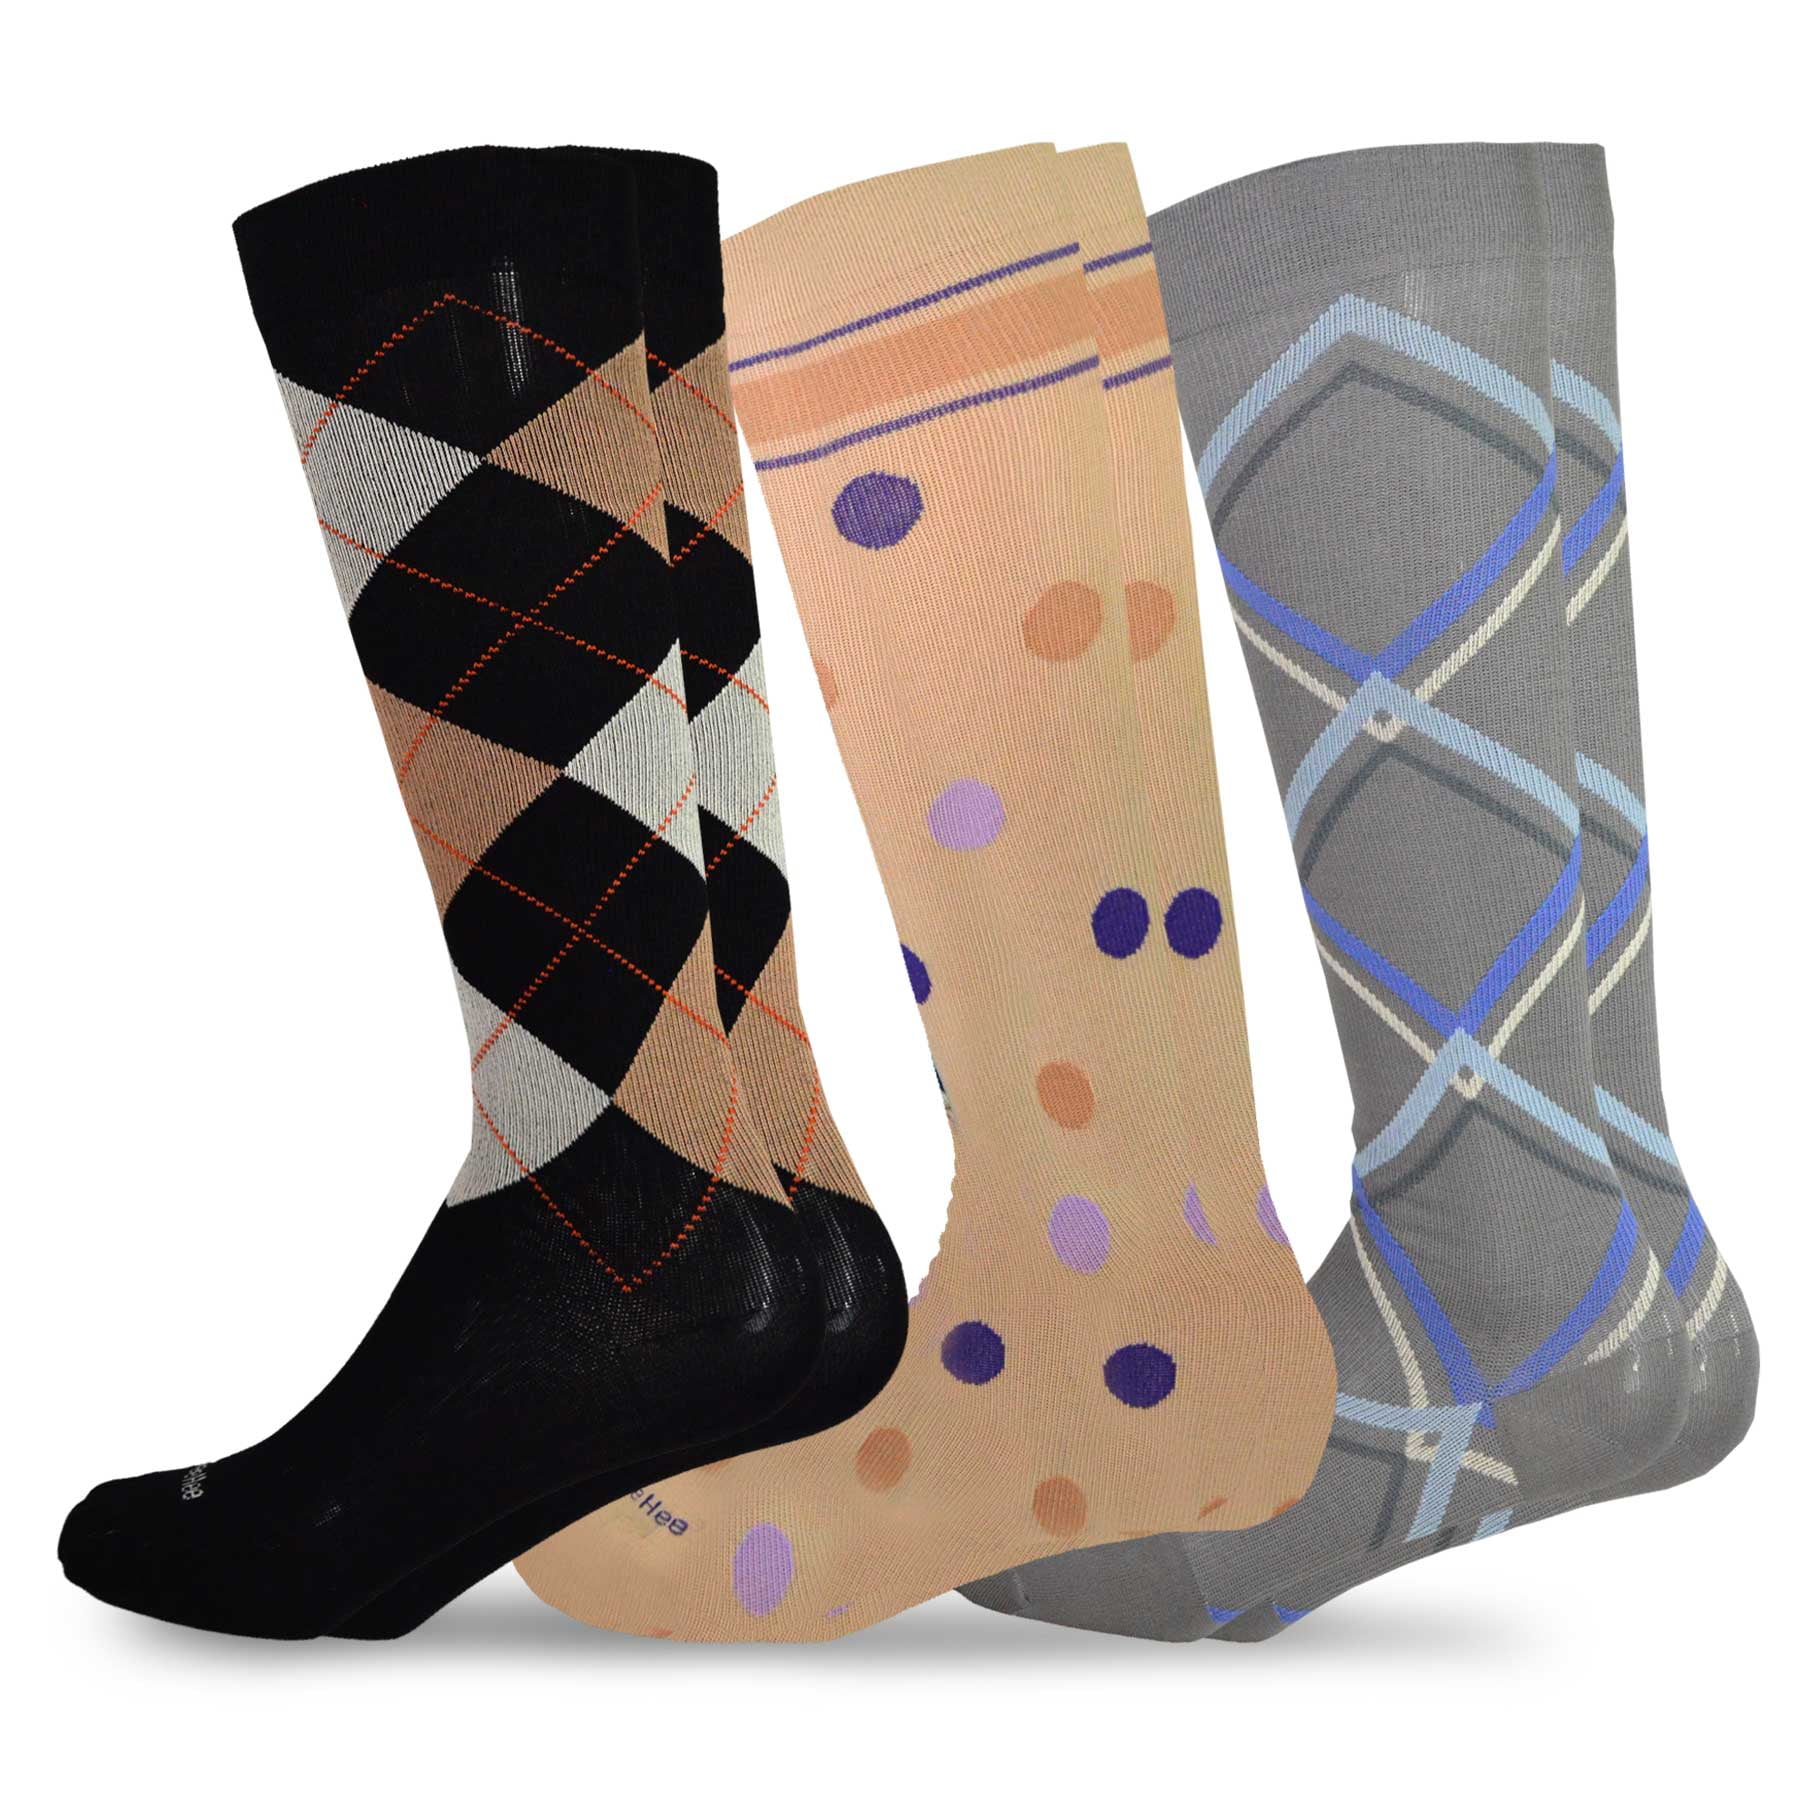 extra moderate compression socks for men